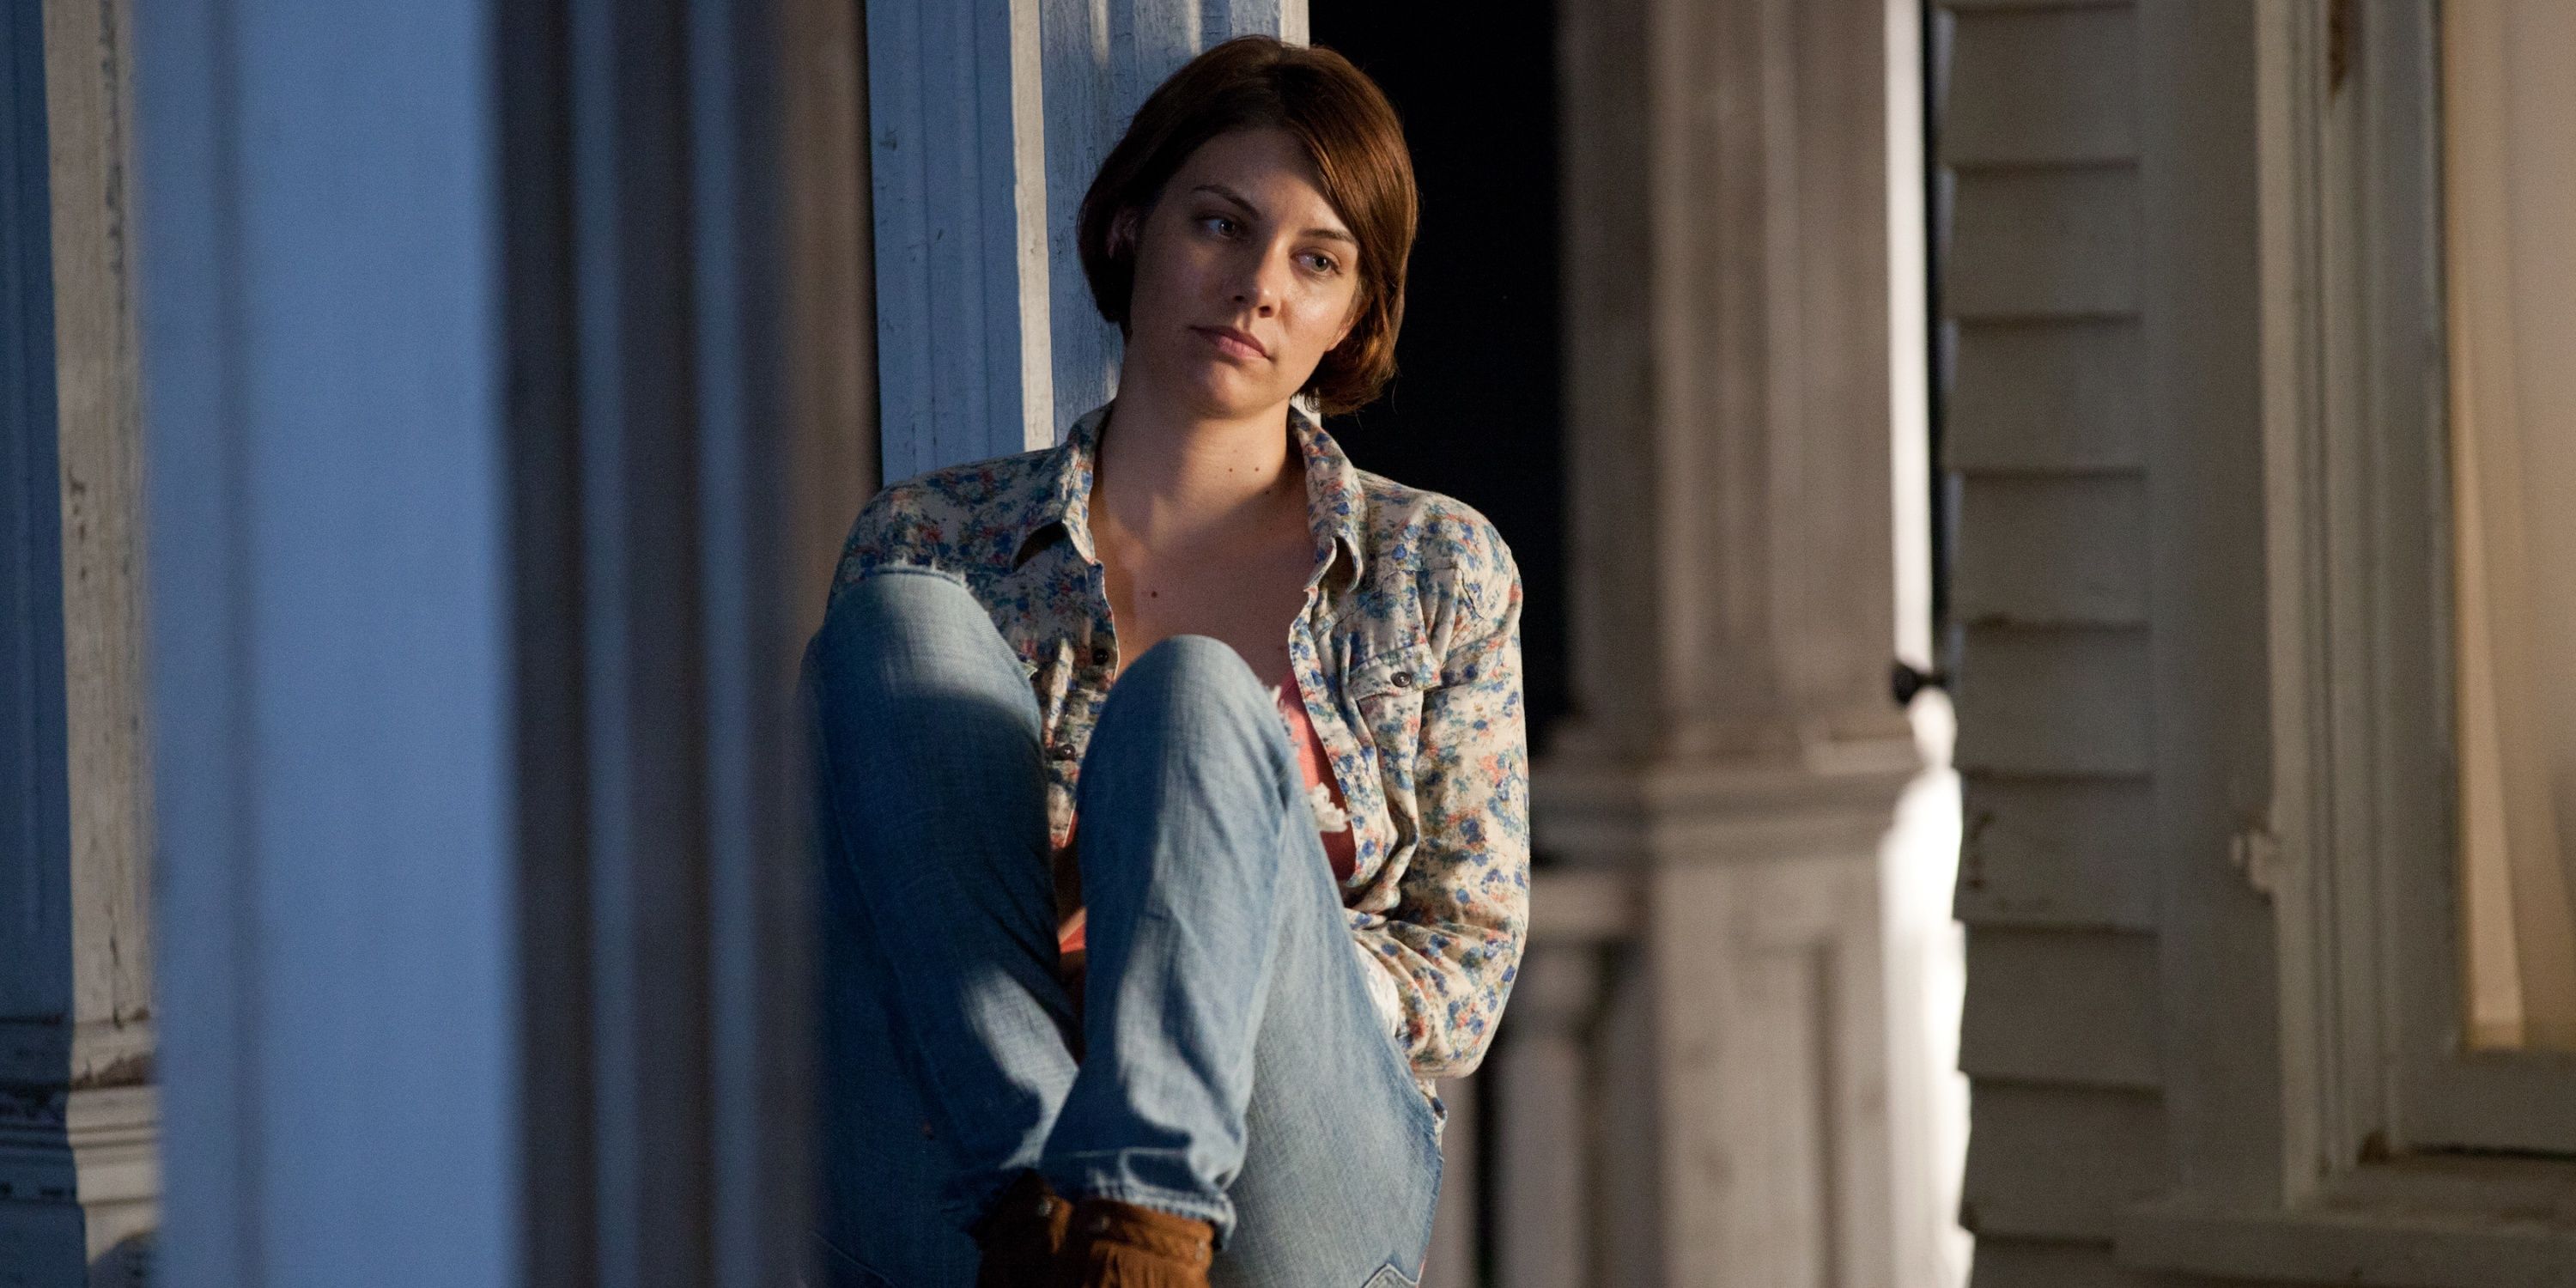 Lauren Cohan as Maggie sitting on a railing in The Walking Dead